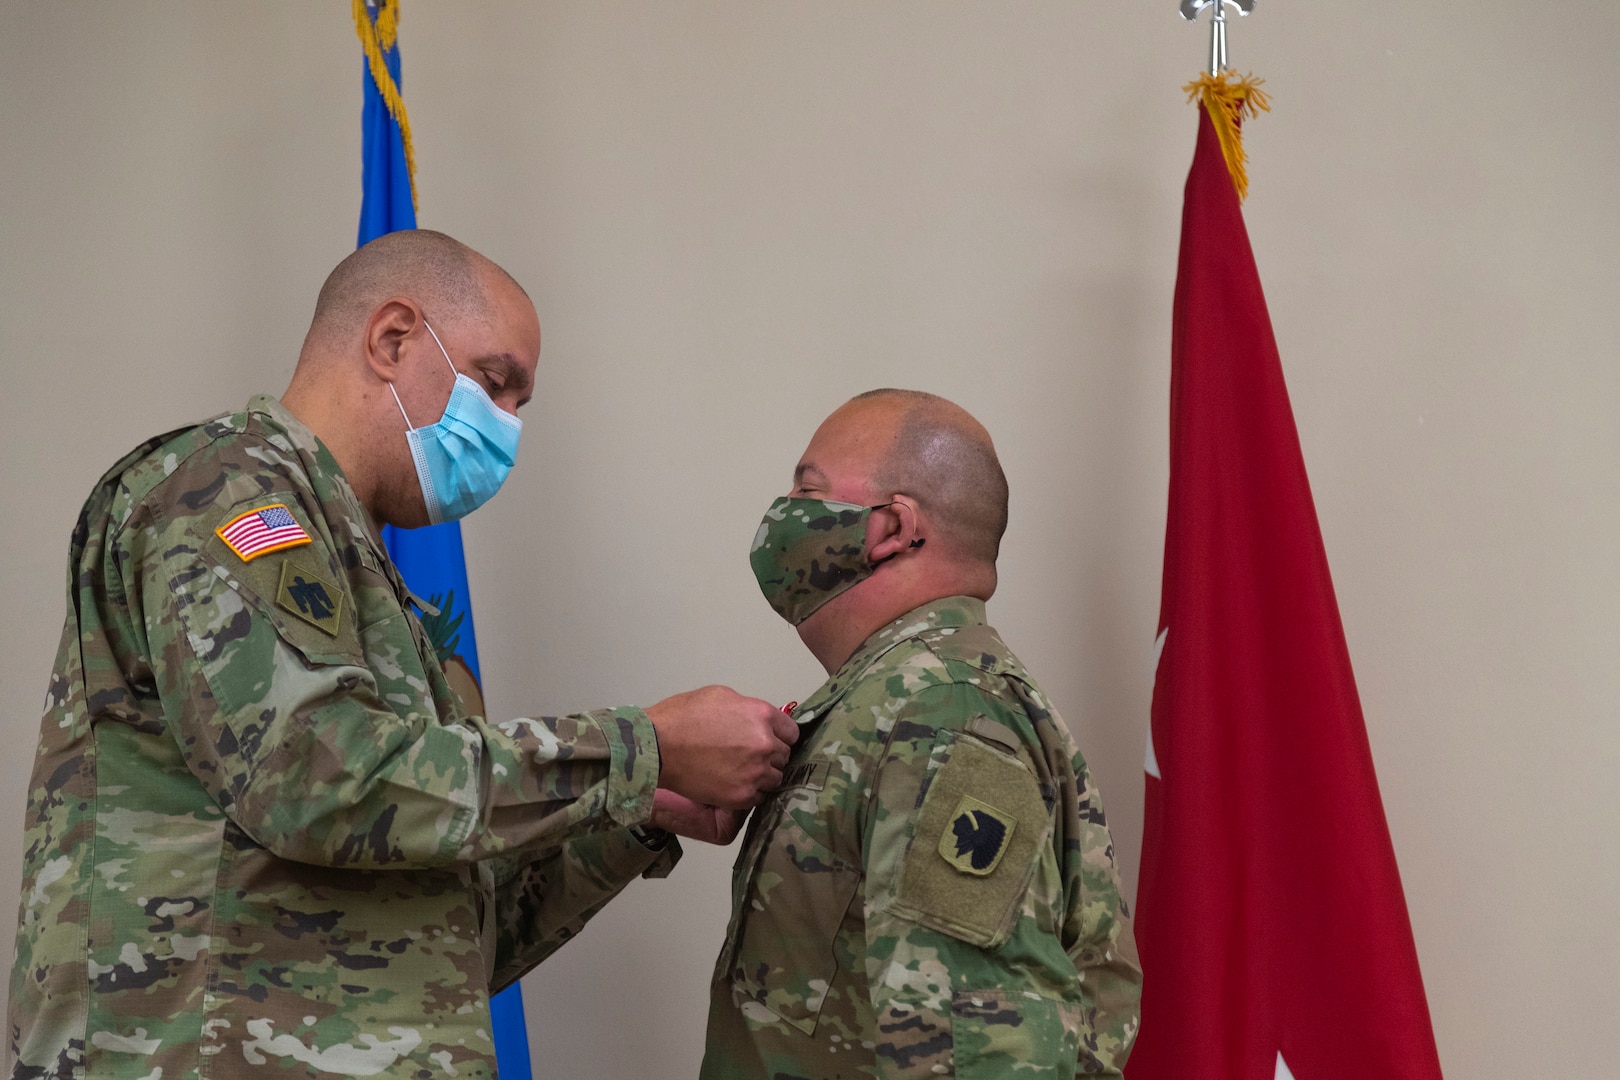 Sgt. Pedro Gonzales III (right), member of the Oklahoma Army National Guard, receives the Oklahoma Star of Valor from Maj. Gen. Michael Thompson (left), adjutant general for Oklahoma, Thursday at the Regional Training Institute in Oklahoma City for his heroic actions in saving his neighbor’s life. In September 2020, Gonzales stepped between his neighbor and a man attacking her with a knife where he received multiple stab wounds to the face and neck. The medal is Oklahoma’s second highest military award which honors Oklahoma National Guard members who carry out heroic or valorous acts, typically involving risk of life or injury in the process of protecting another in non-combat circumstances. (Oklahoma National Guard photo by Sgt. Jordan Sivayavirojna)